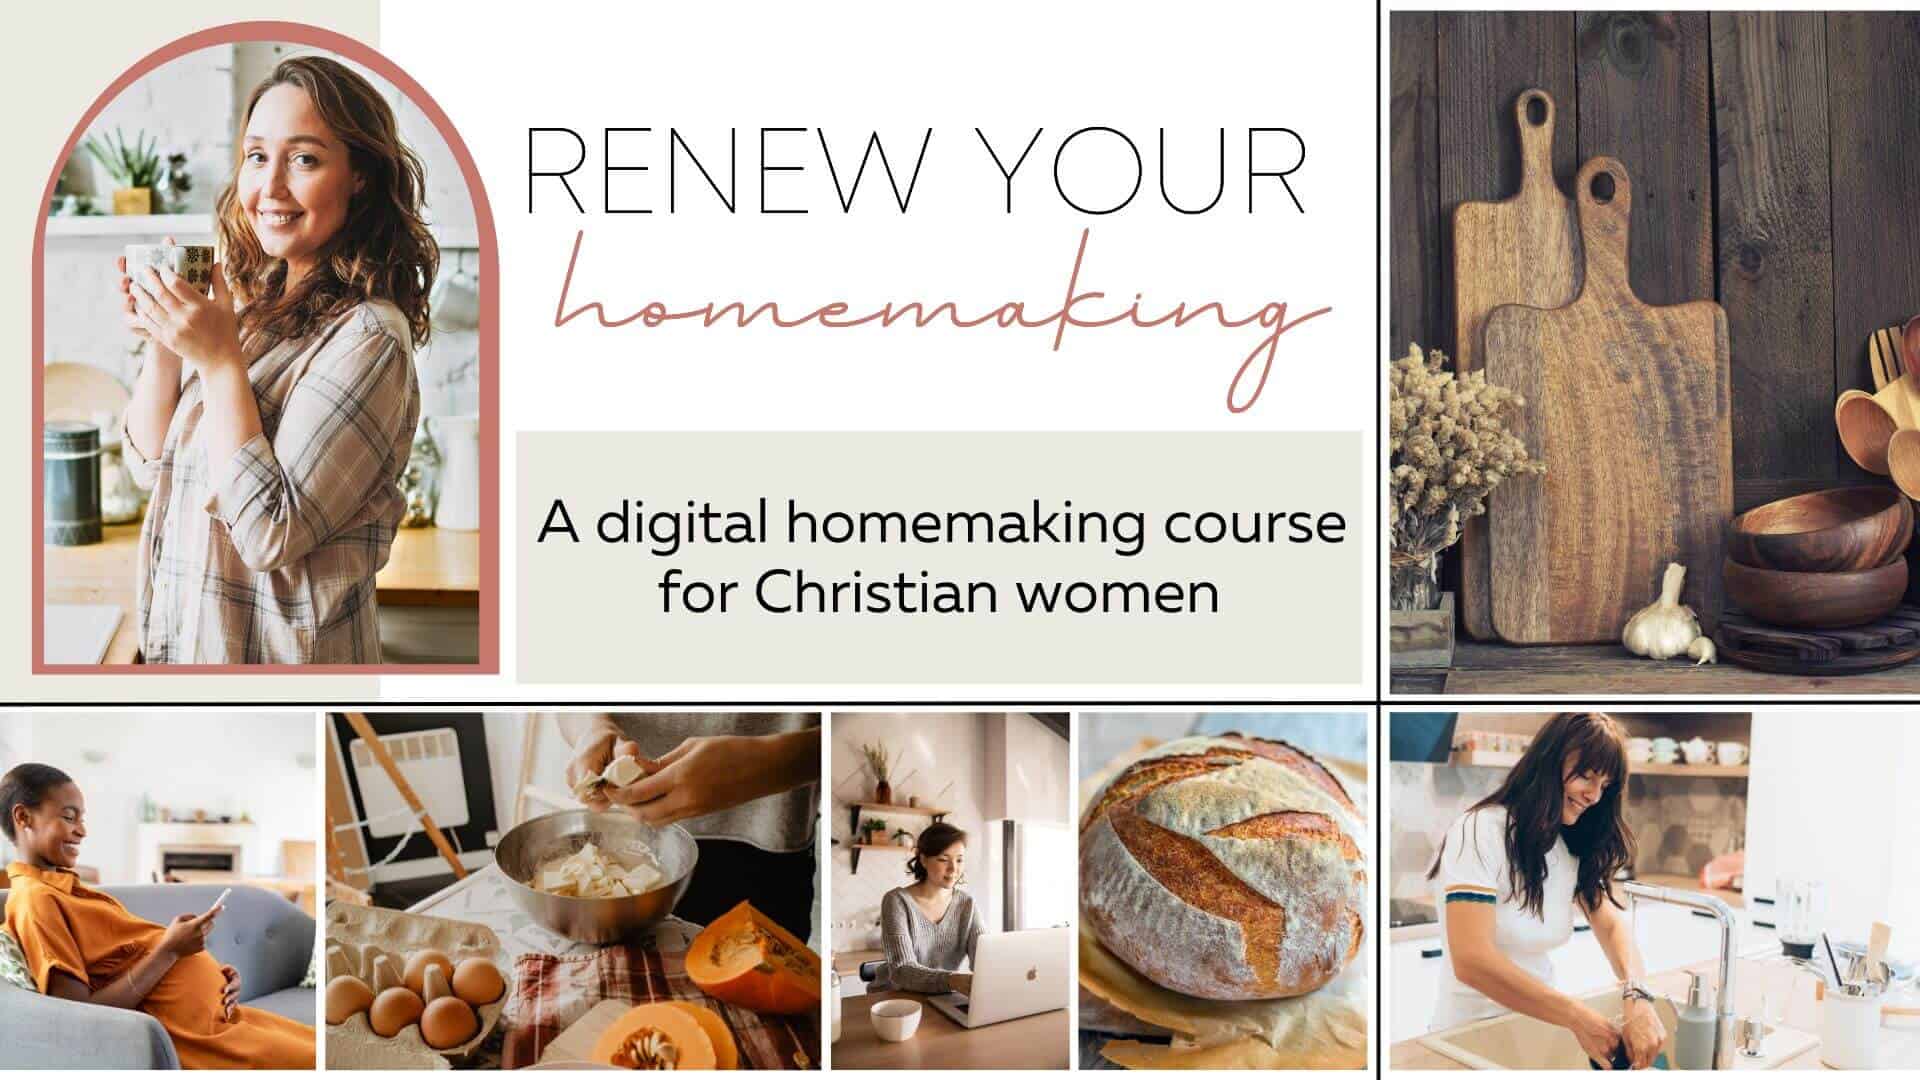 Renew Your Homemaking, a digital Christian homemaking course for women